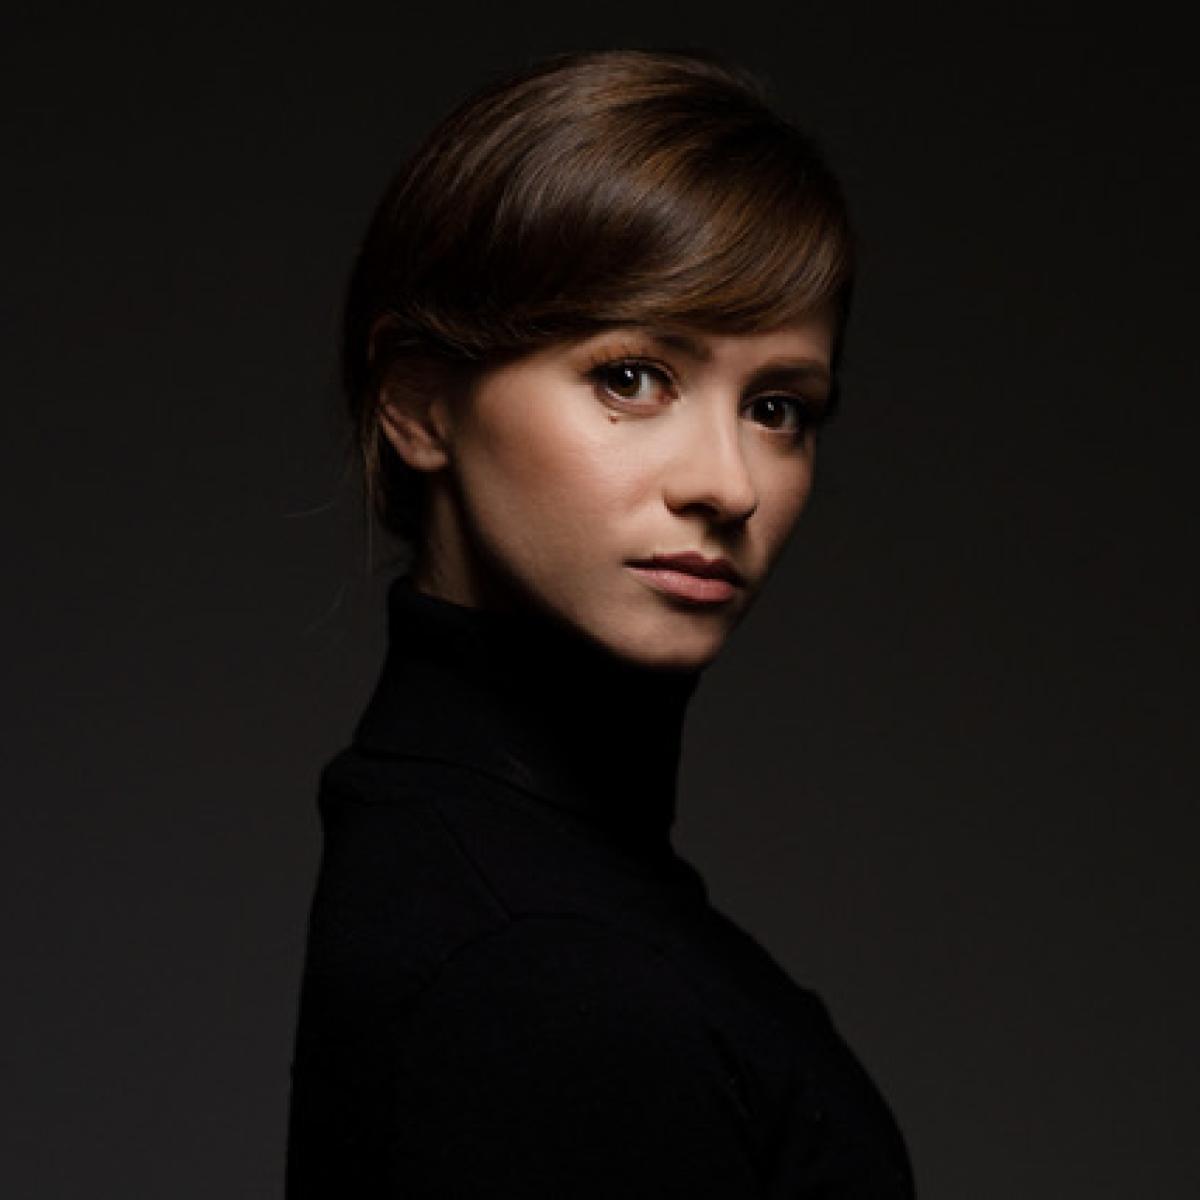 A photo of a woman in a black turtleneck with dark brown hair.